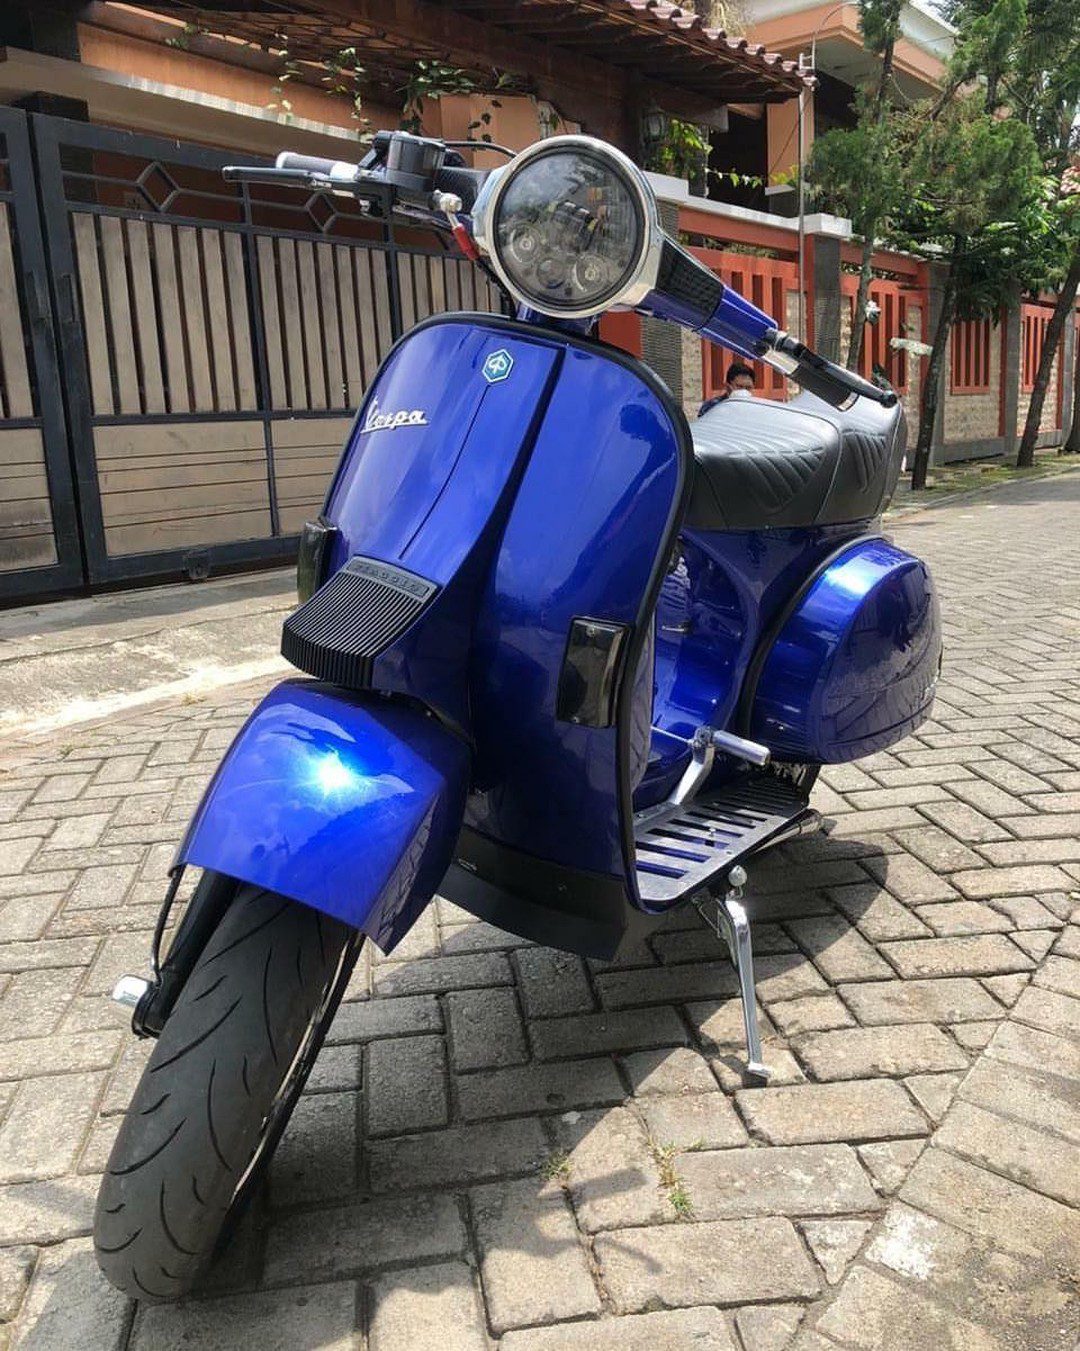 Blue Vespa PX custom modified with custom wheels

Order original Vespa wheels @vesparkindo whatsapp 0819-04-595959

hashtag and mention @vespapxnet for feature repost Check website www.vespapx.net for more 

@tofabazta